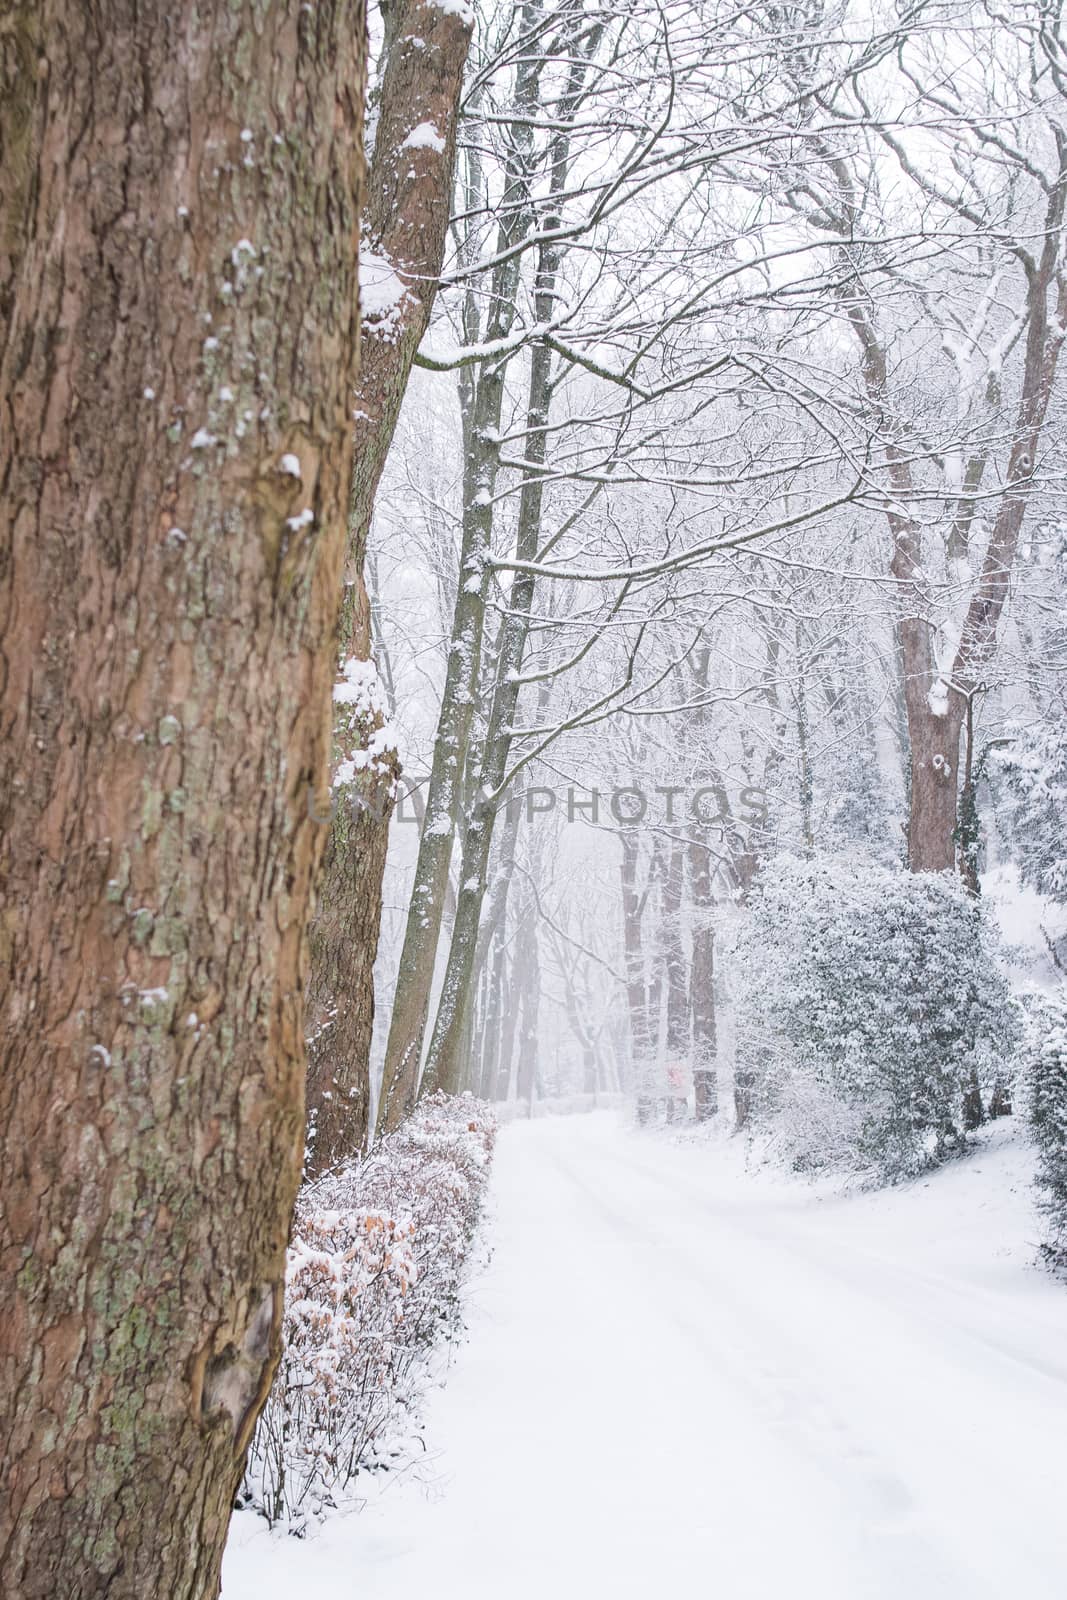 Snowy road at Lousberg in Aachen, Germany by mbsnapshot